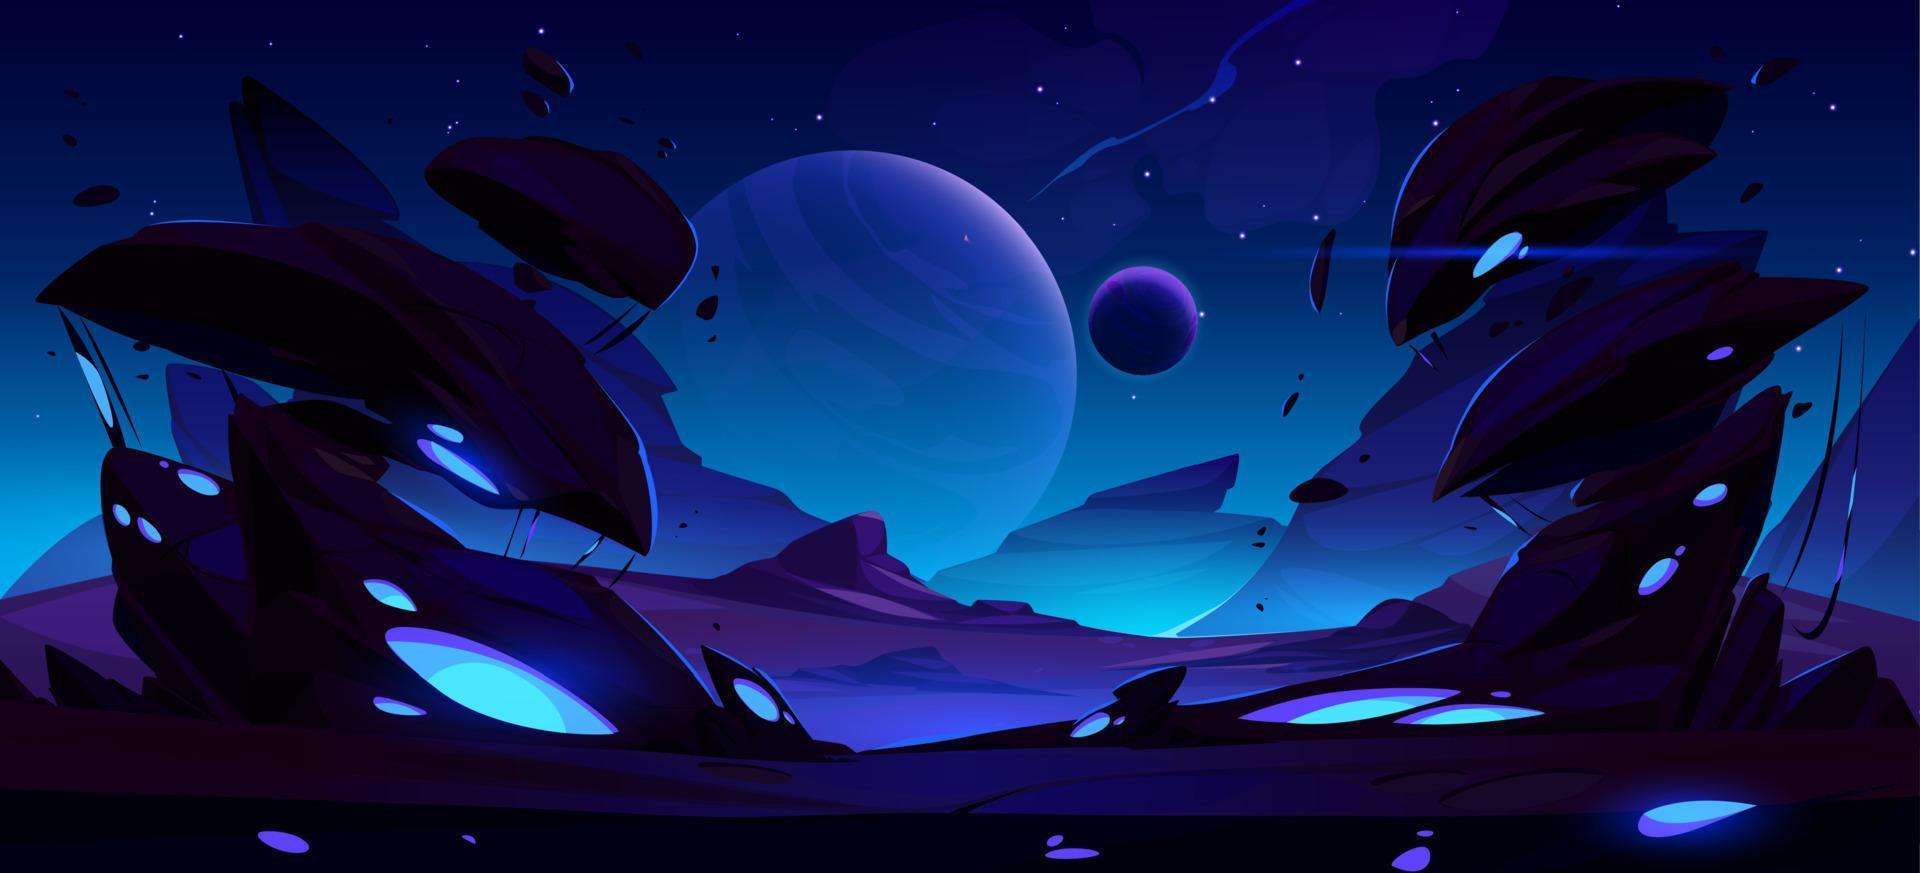 Space background with alien planet at night vector